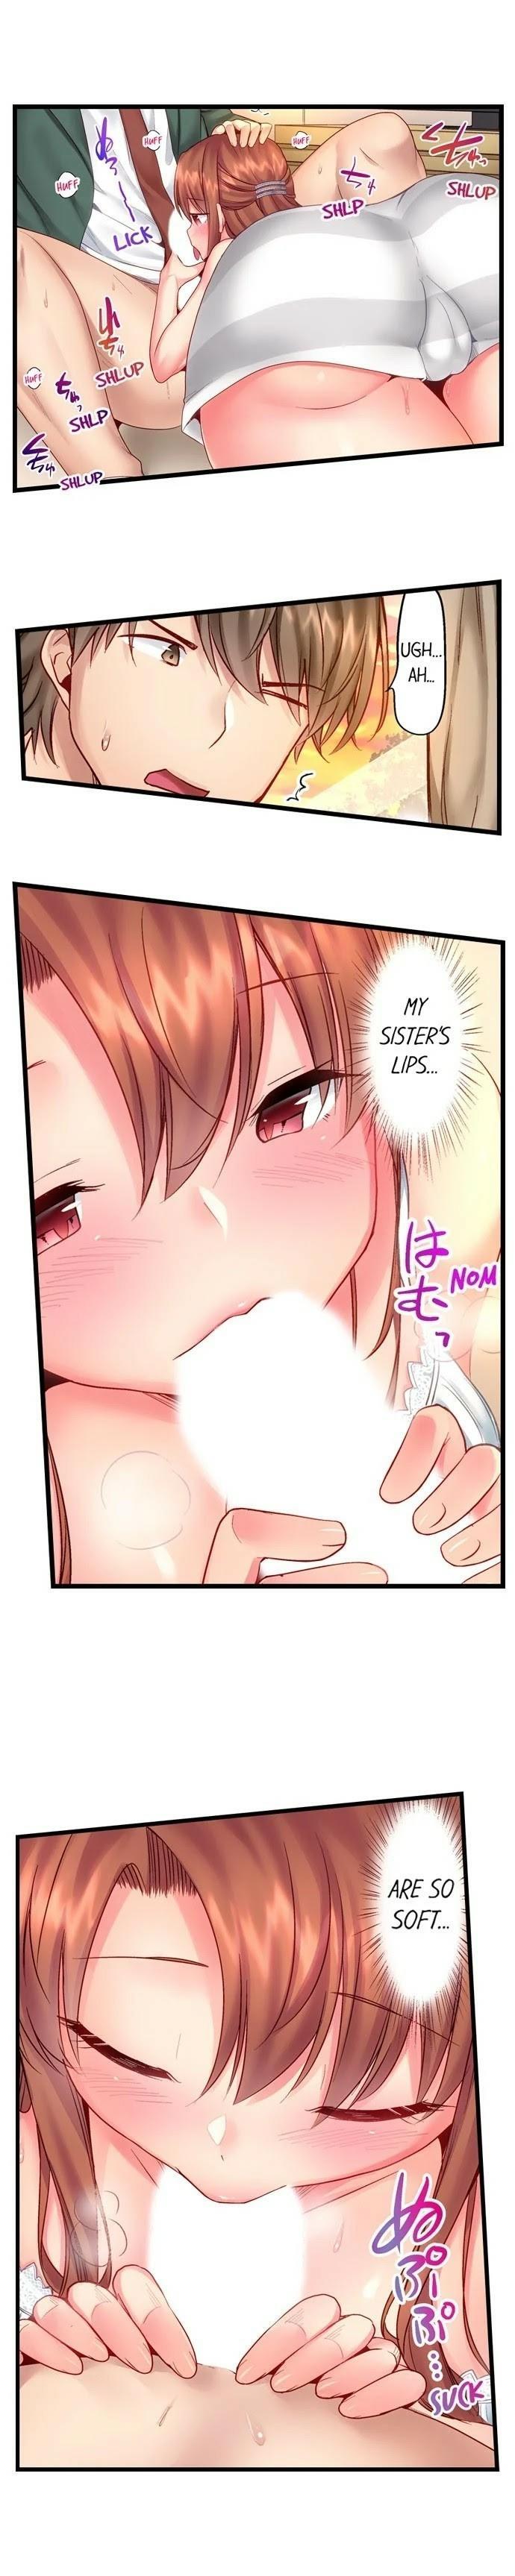 "Hypnotized" Sex with My Brother Ch.21/? 62